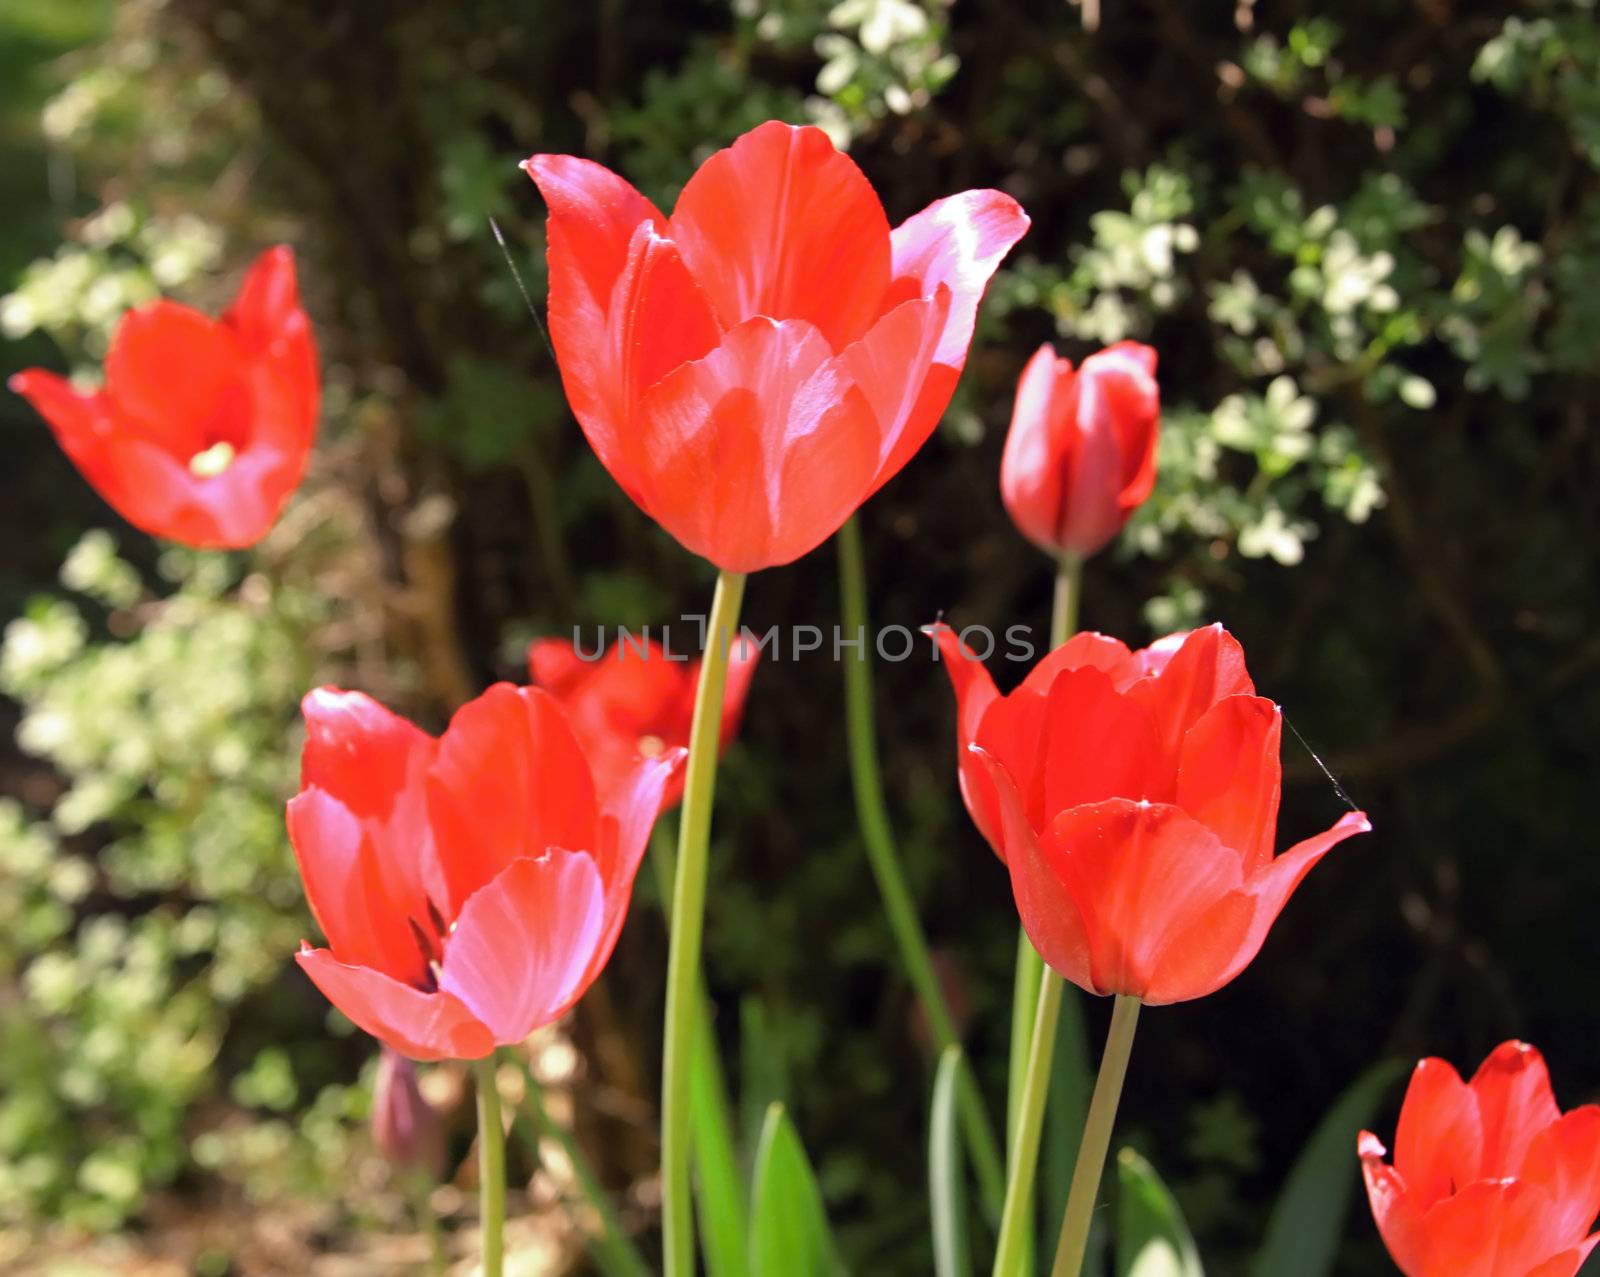 Red and rose tulips in early spring